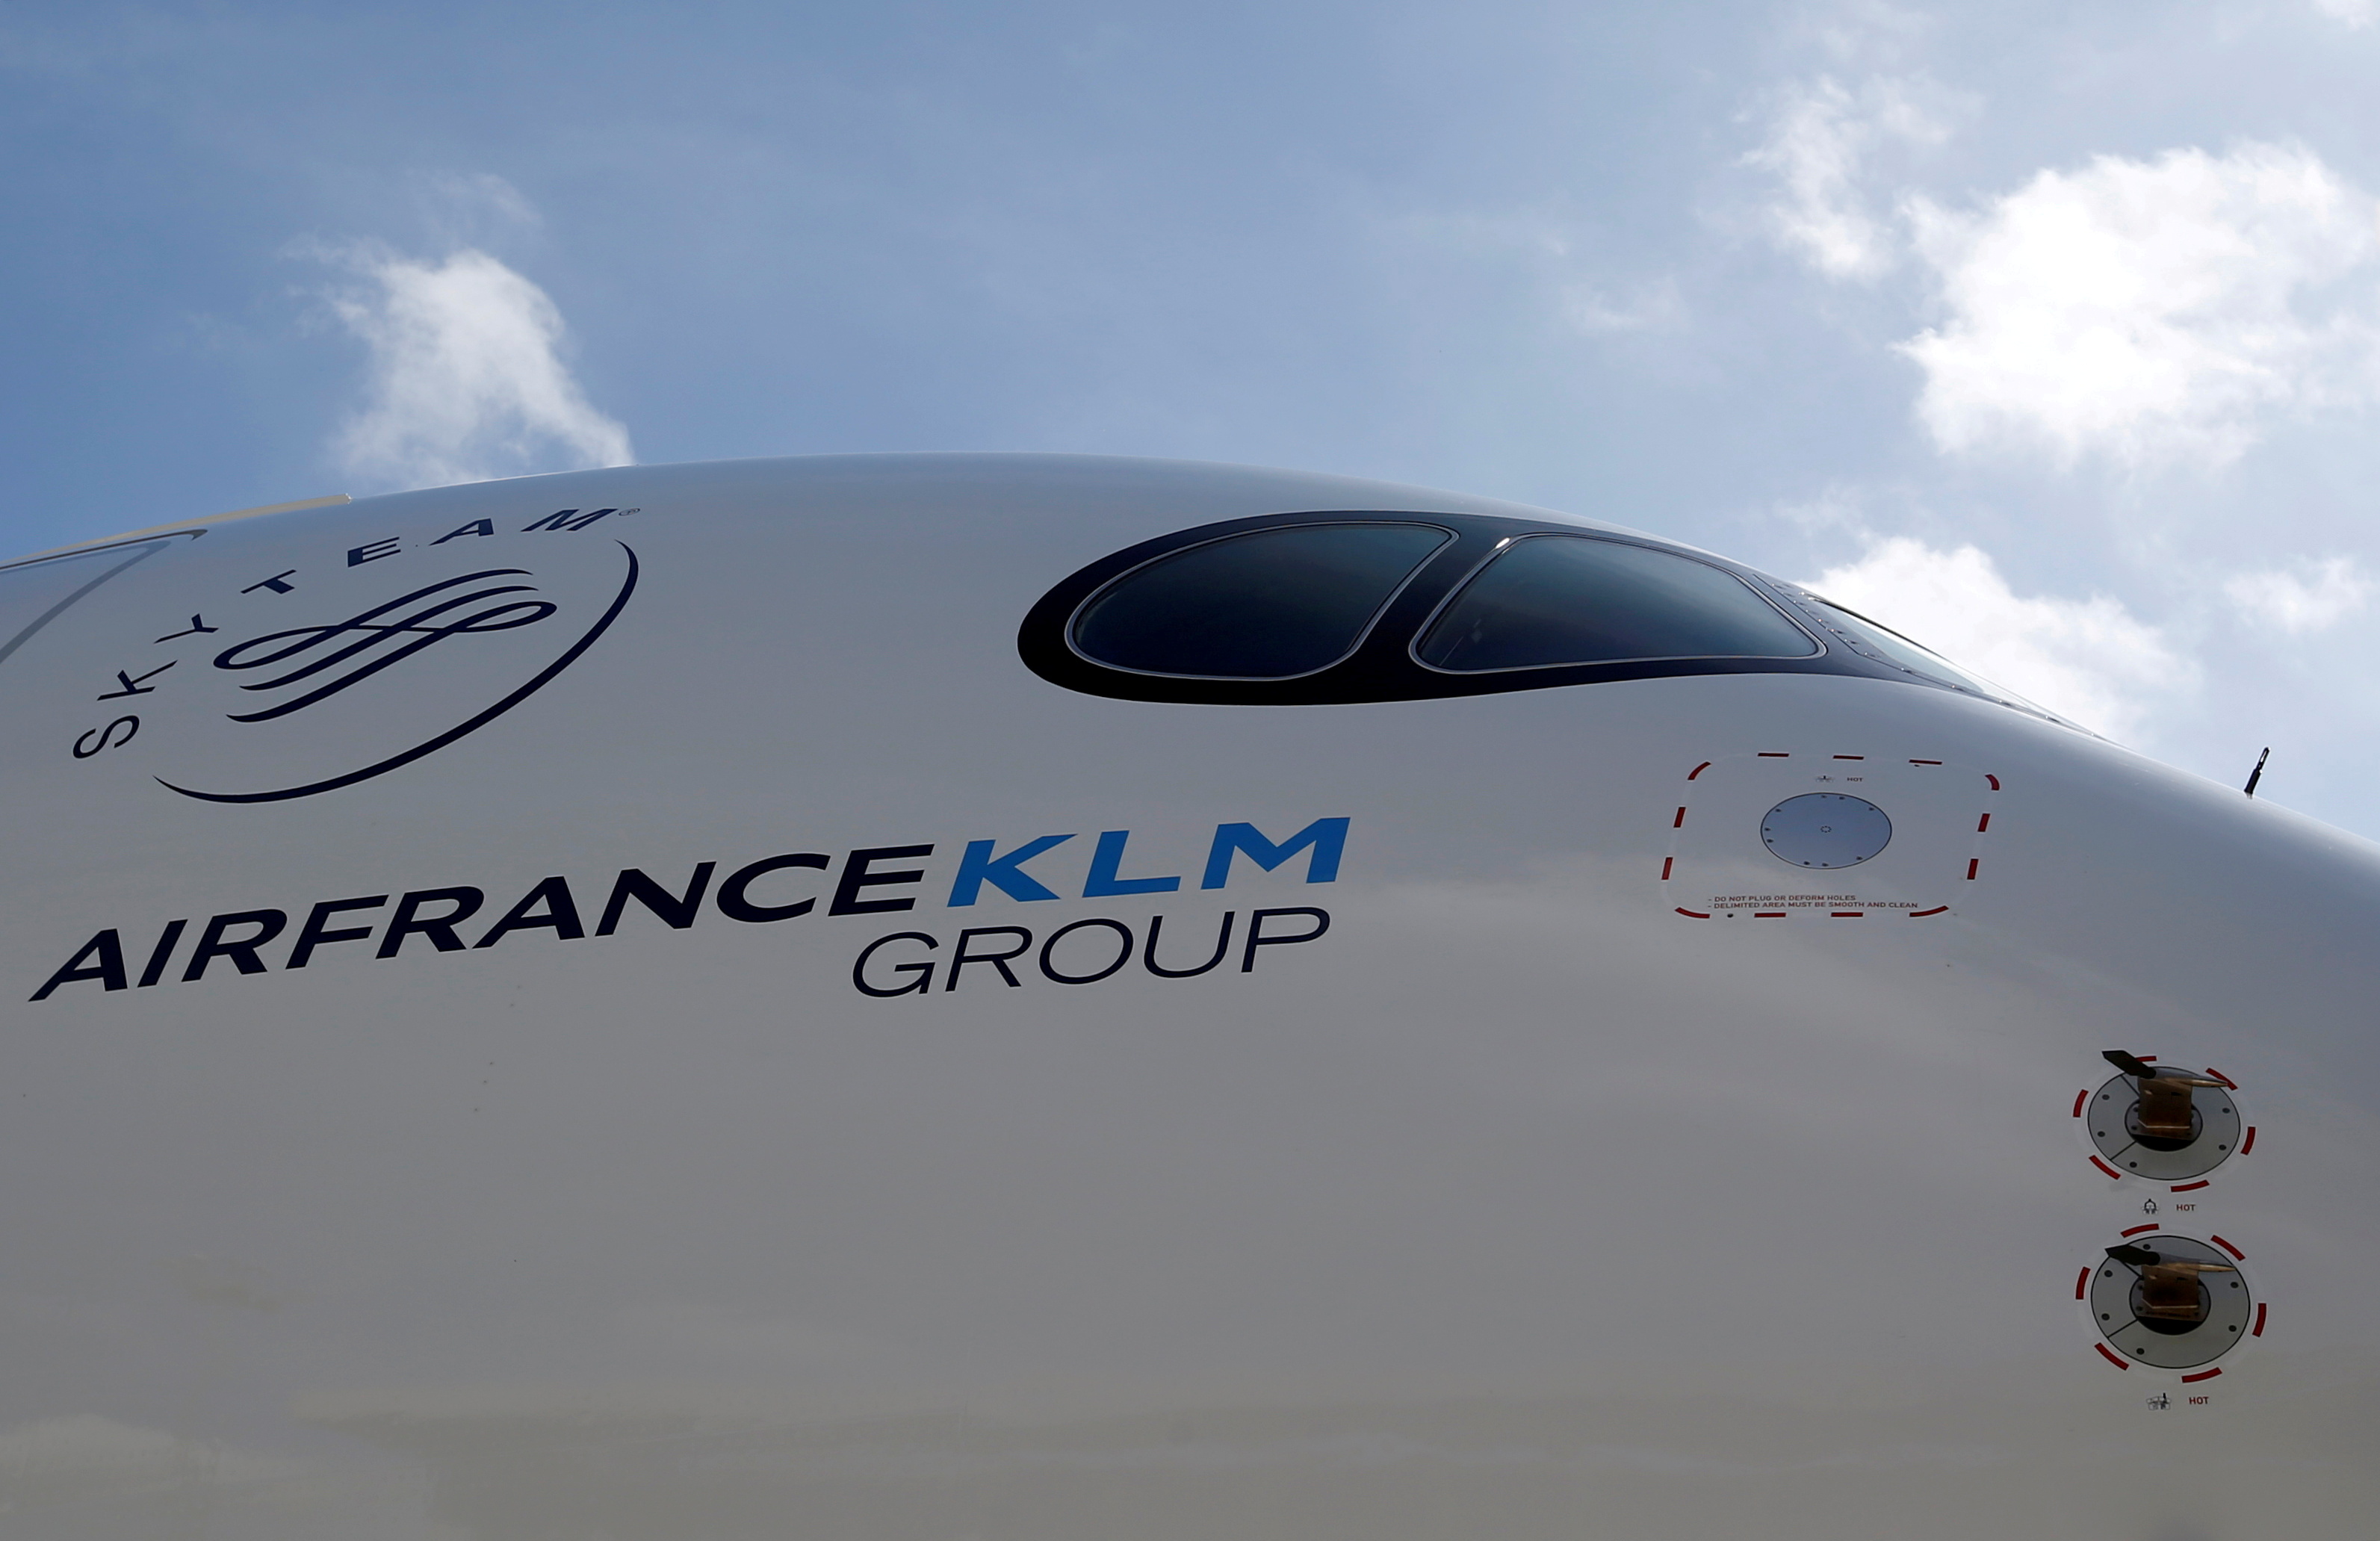 Logo of Air France KLM Group is pictured on the first Air France airliner's Airbus A350 during a ceremony at the aircraft builder's headquarters of Airbus in Colomiers near Toulouse, France, September 27, 2019. REUTERS/Regis Duvignau